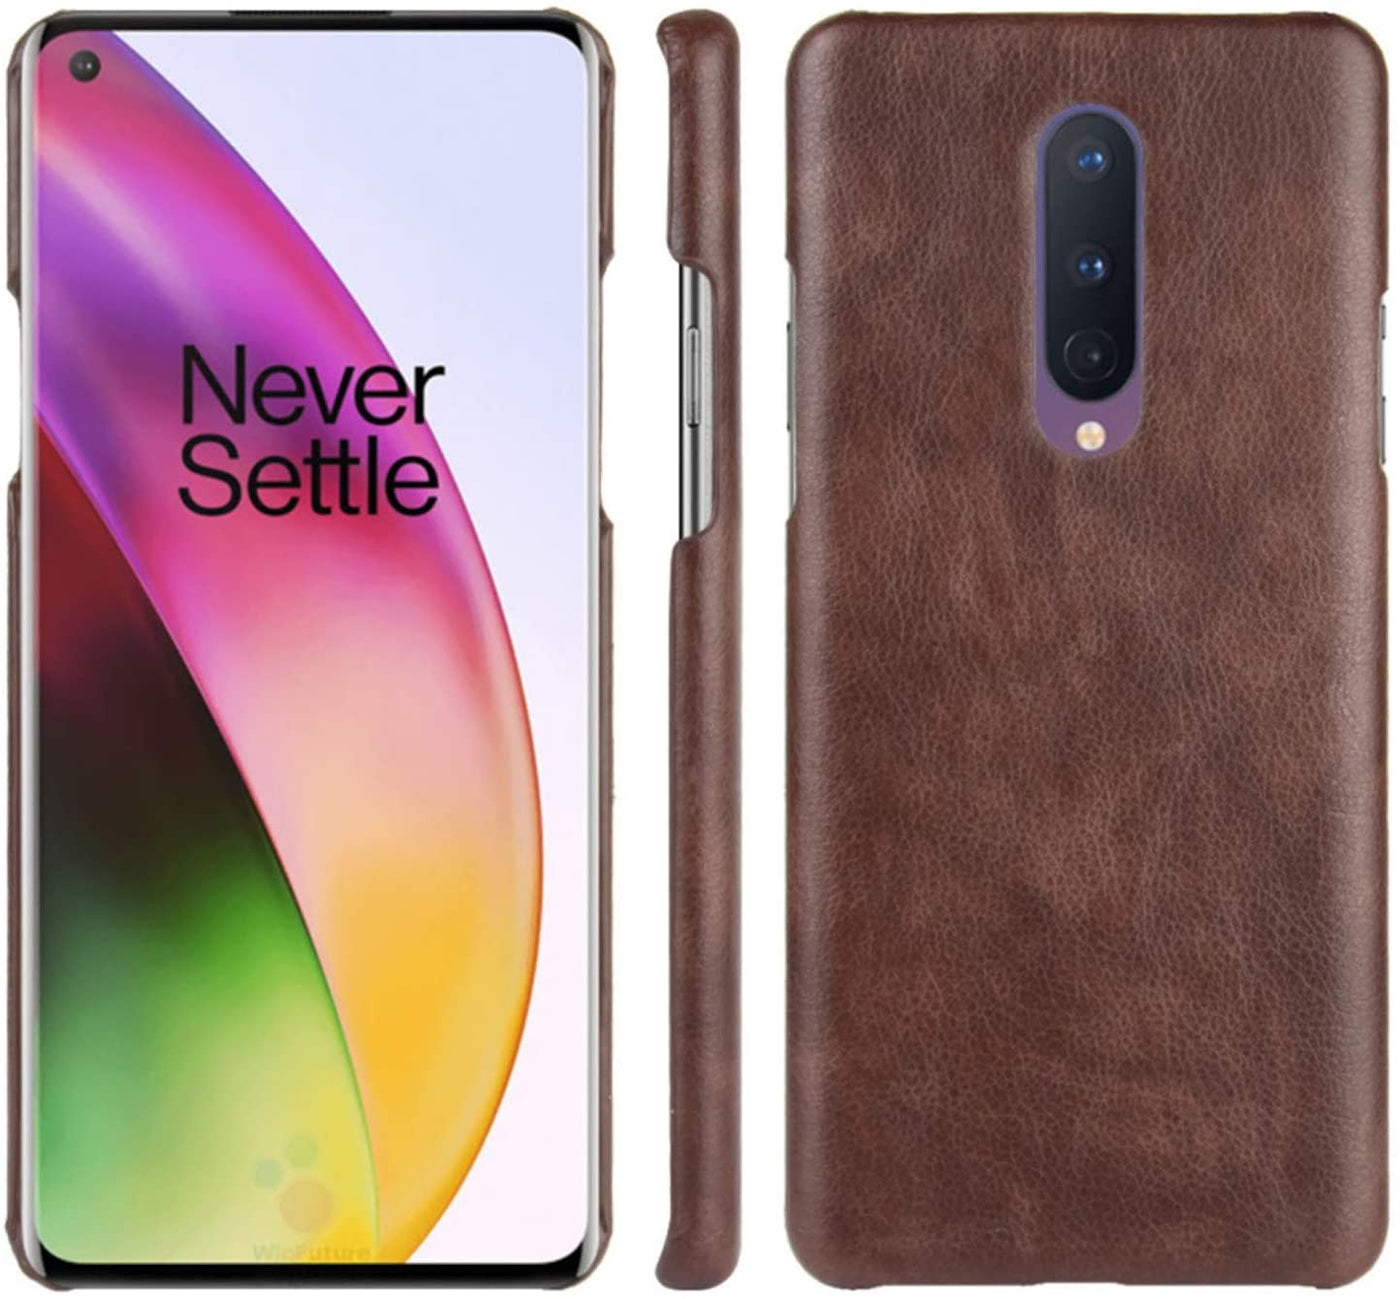 Oneplus 8 coffee color leather back cover case